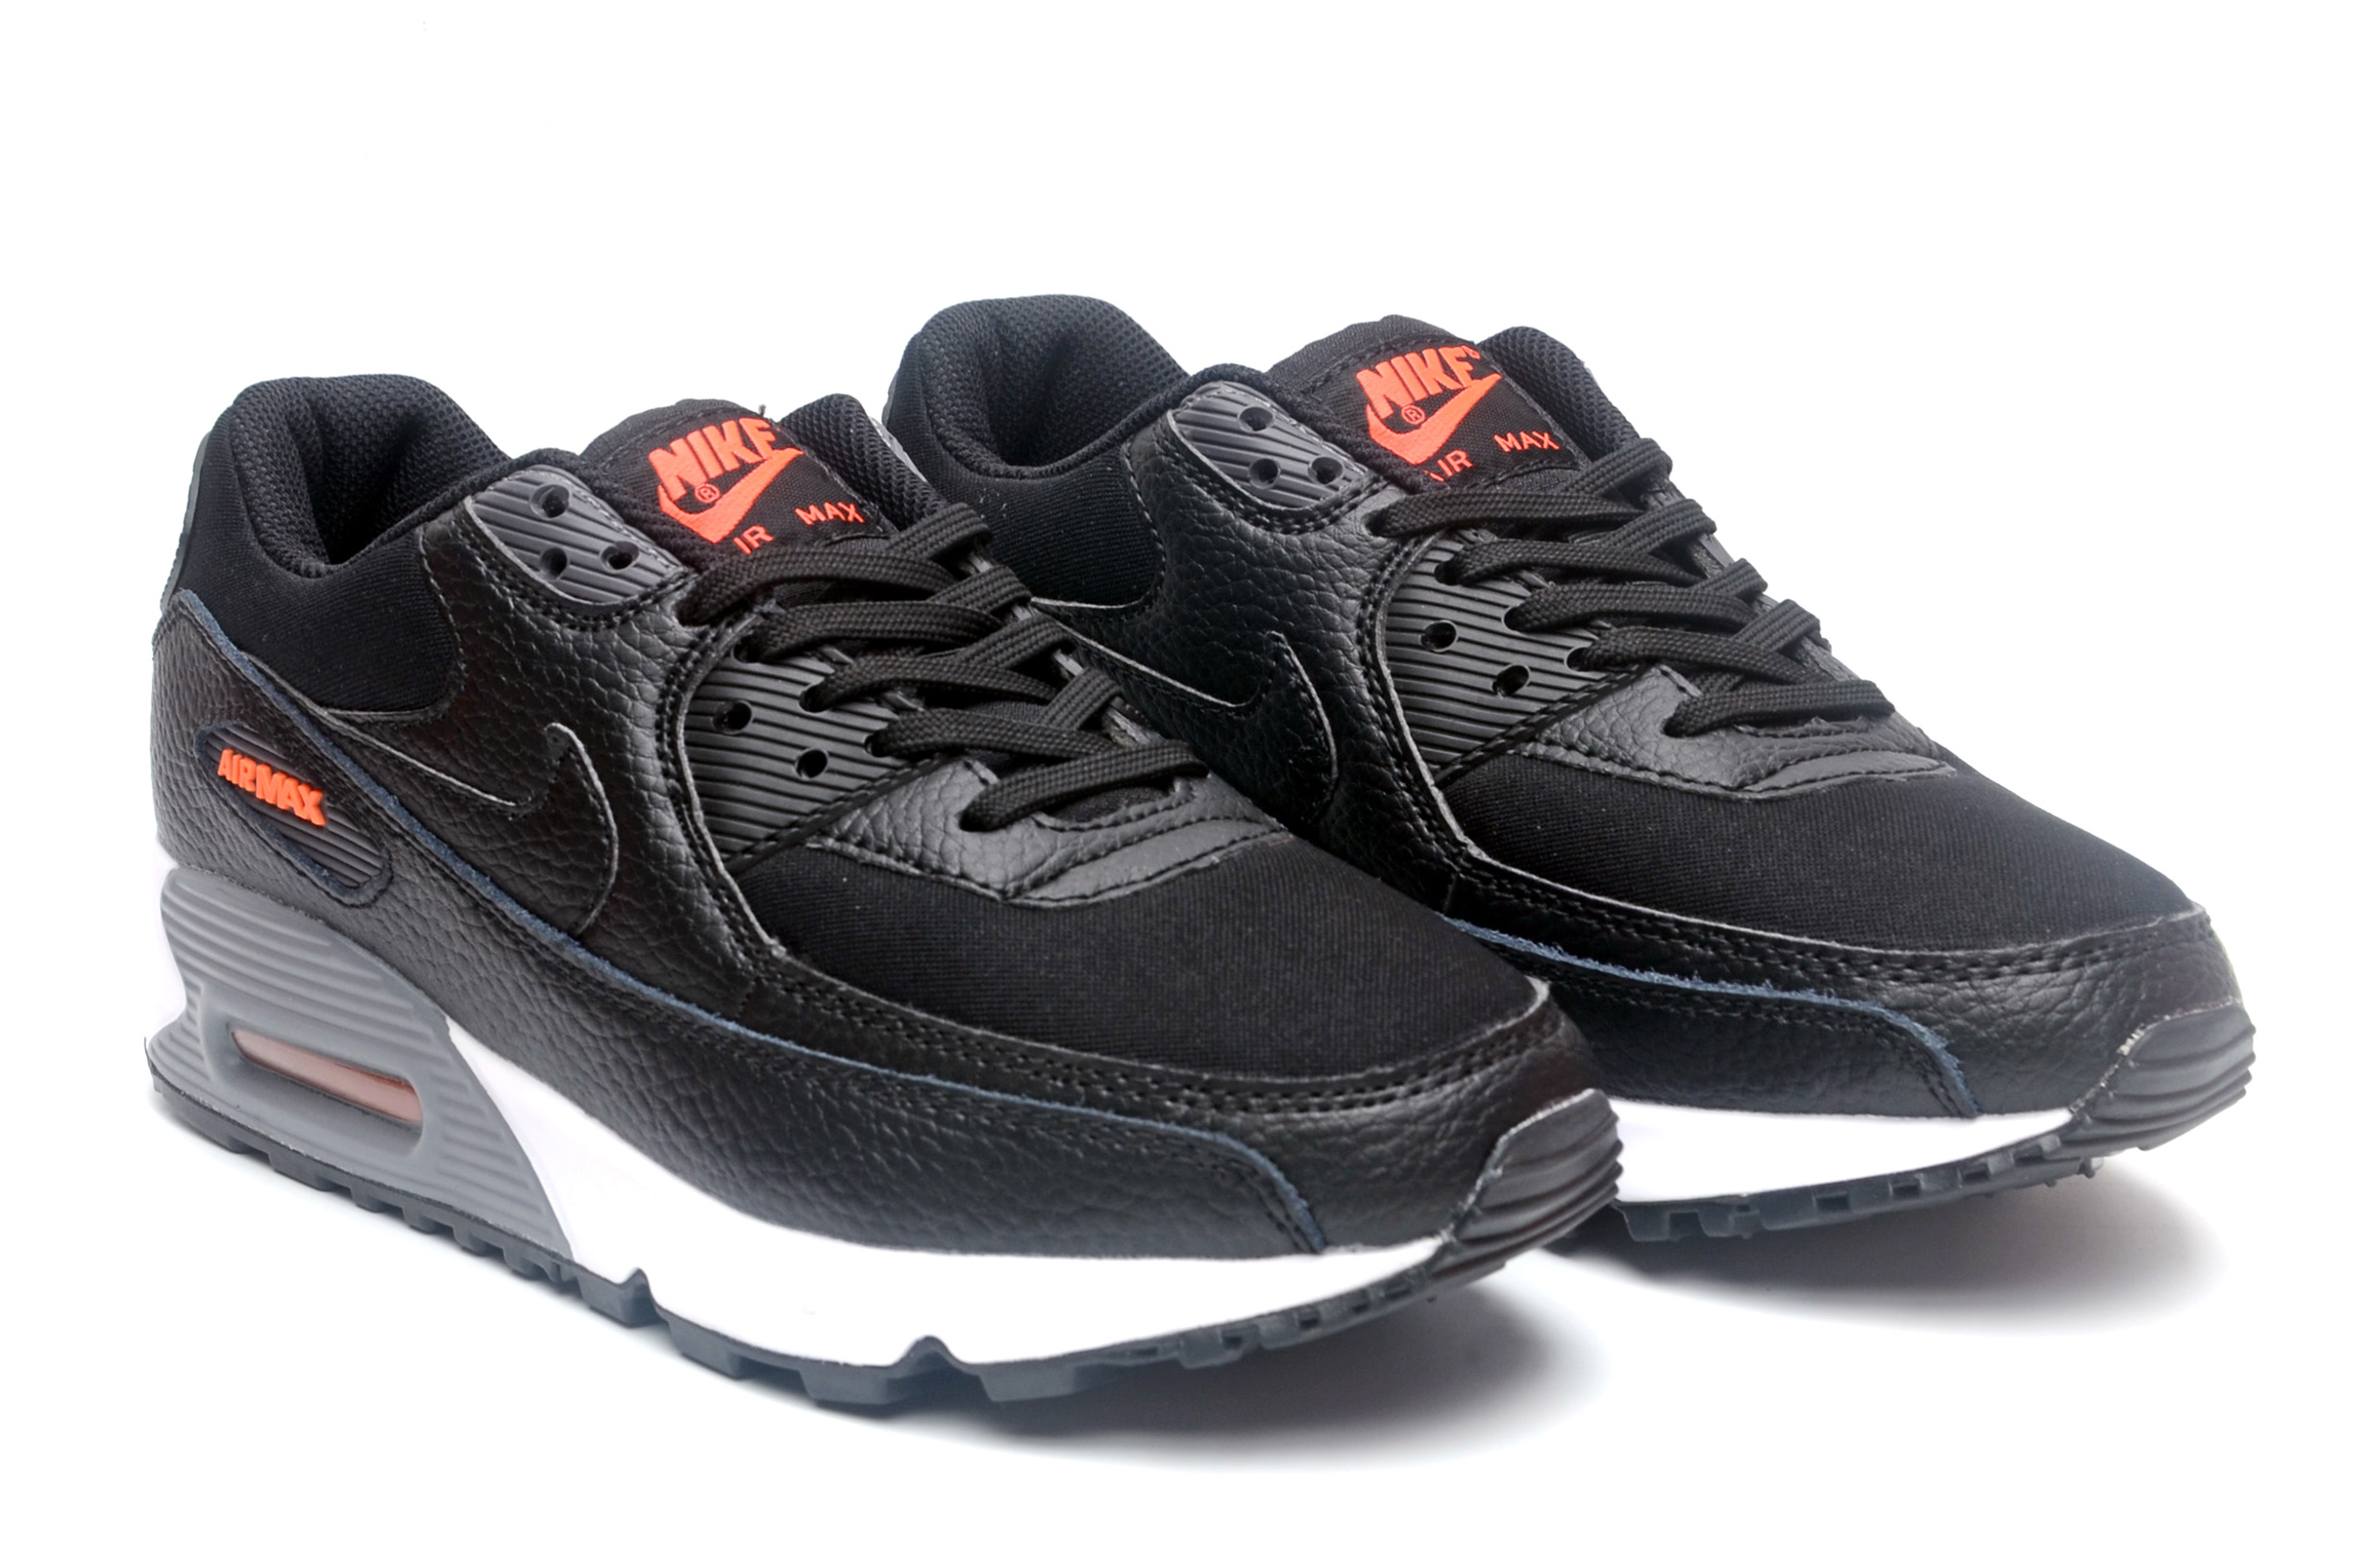 Men's Running weapon Air Max 90 Shoes 040